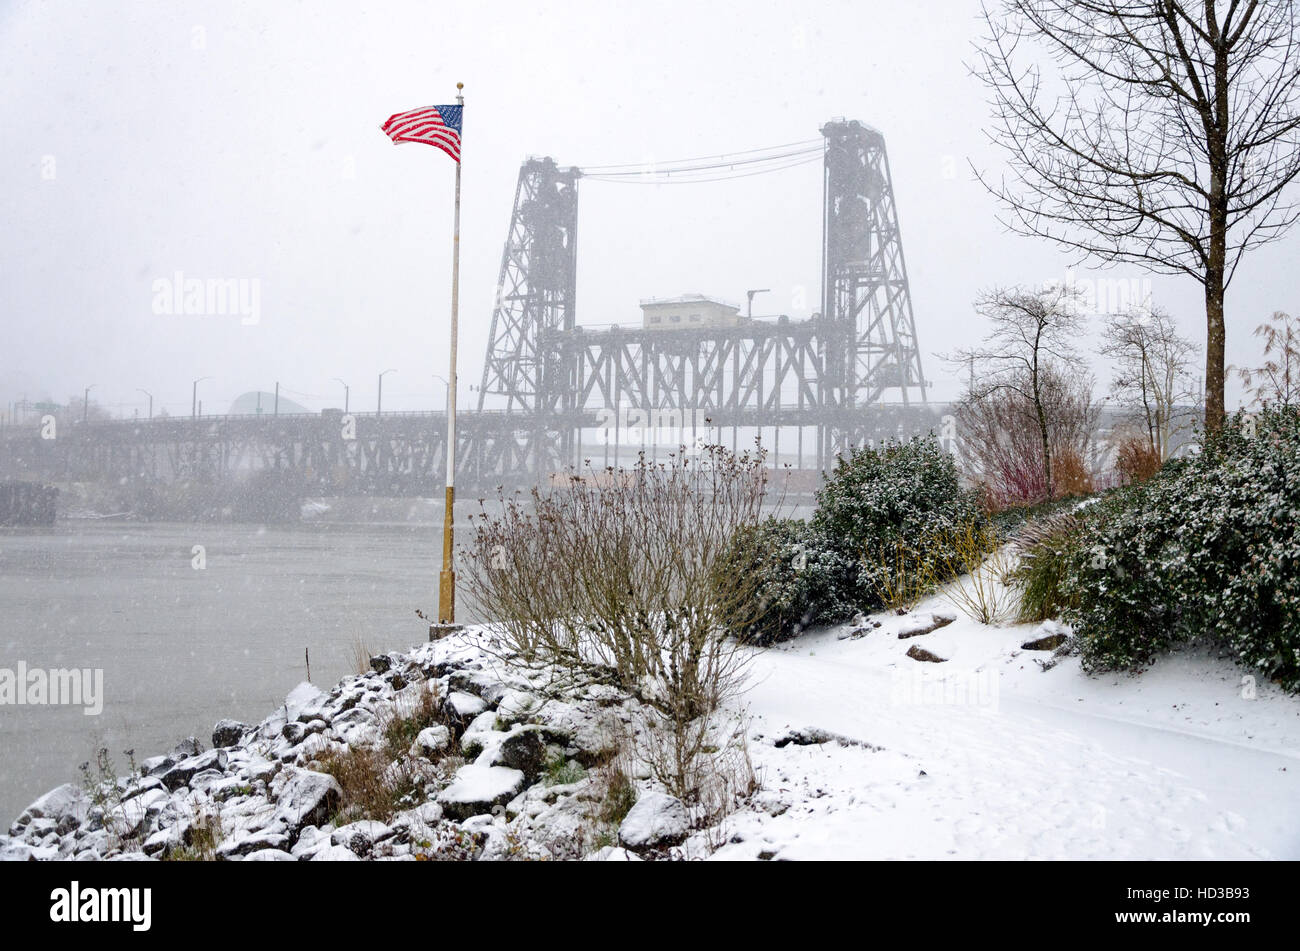 American flag blowing in the wind with the Steel Bridge in the background during a winter snowstorm in Portland, Oregon Stock Photo